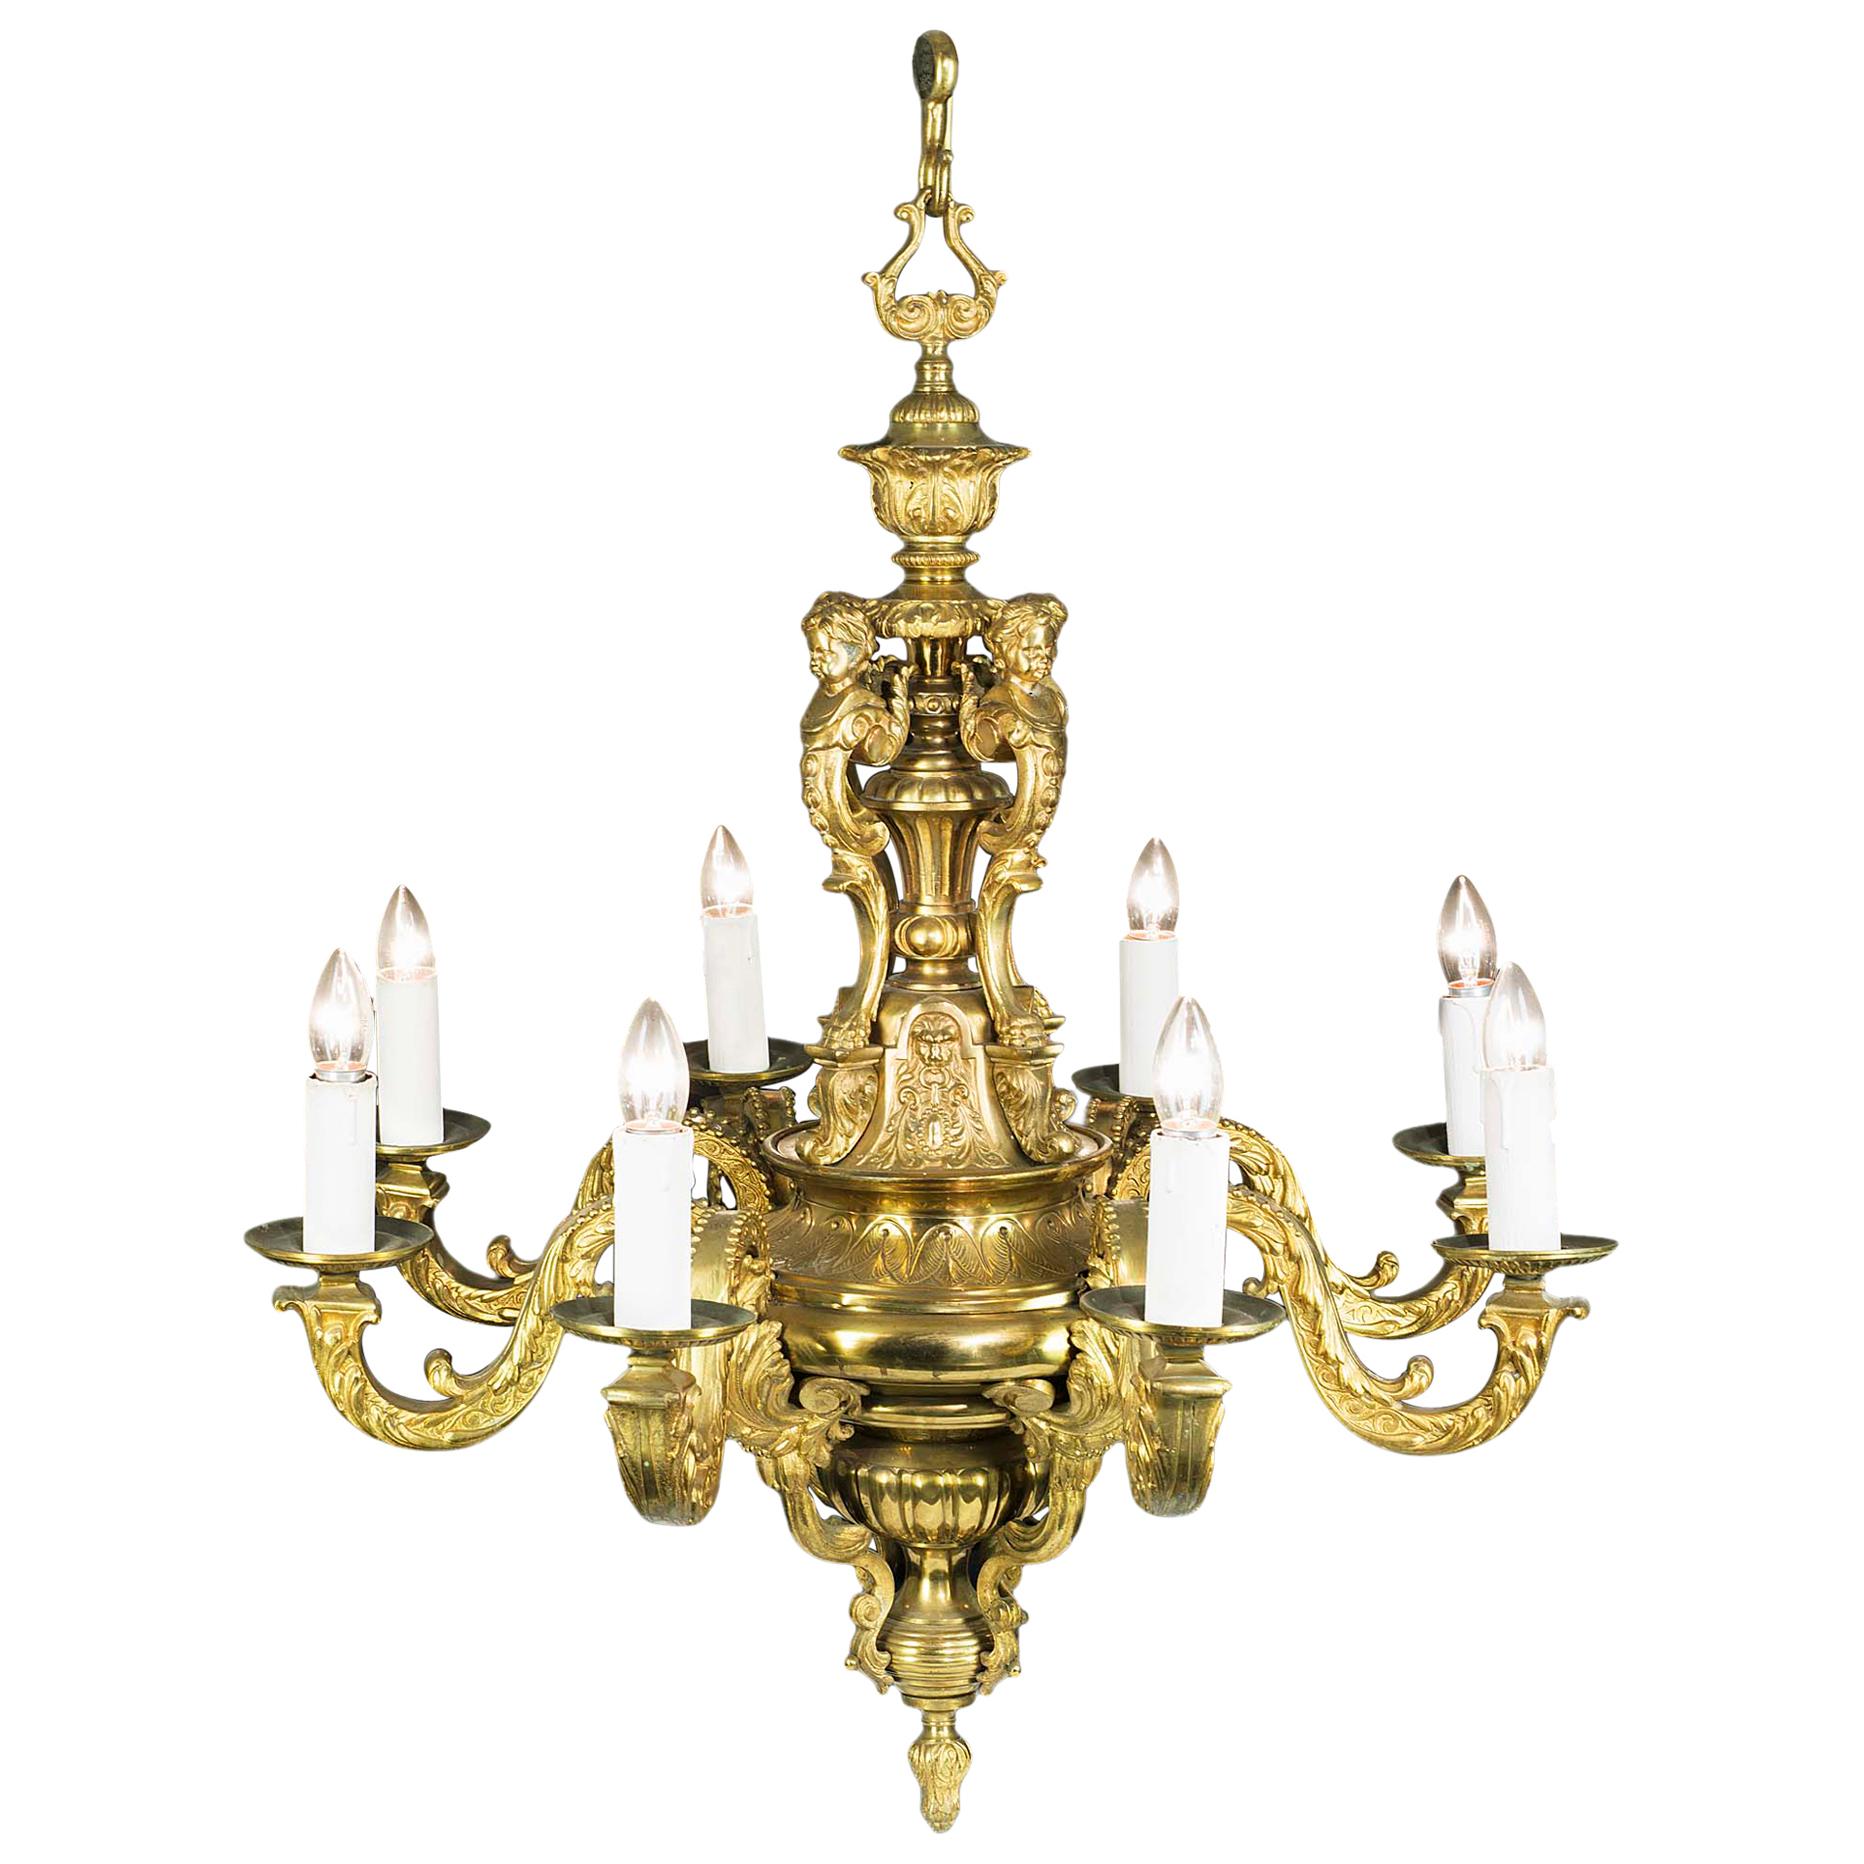 Large Eight Branch Victorian Baroque Style Antique Chandelier